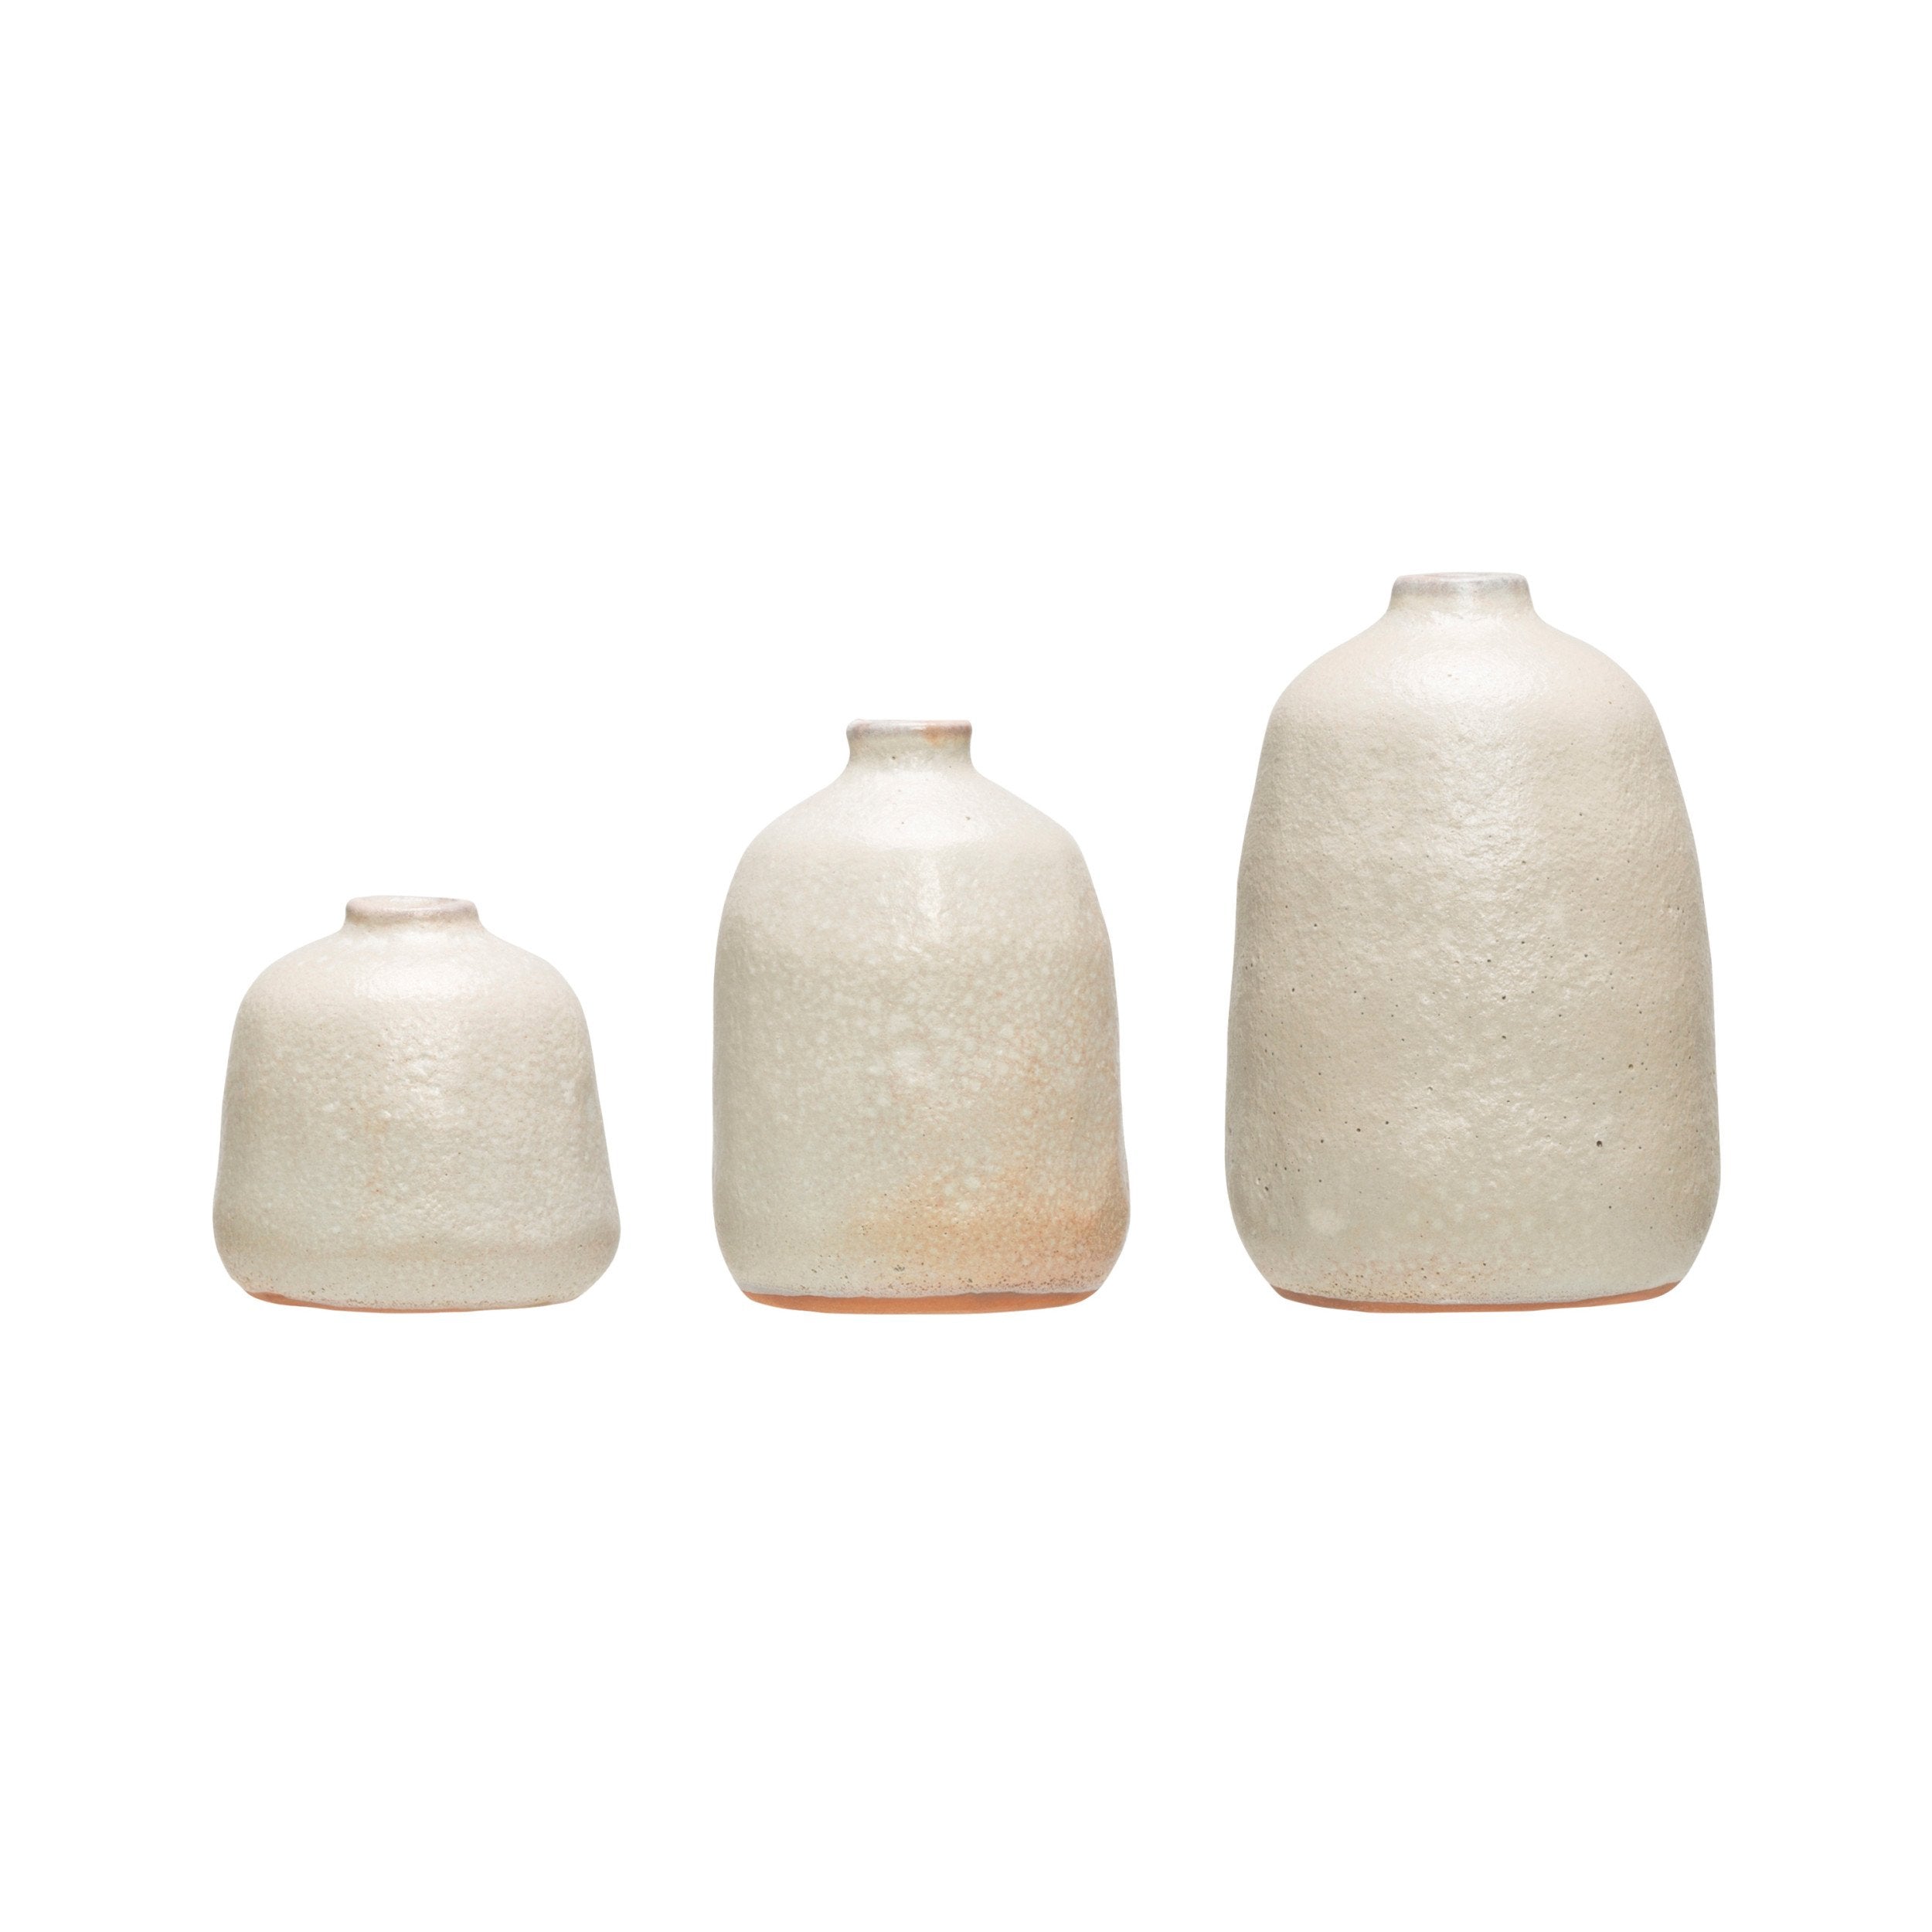 Terracotta Vases with Sand Finish